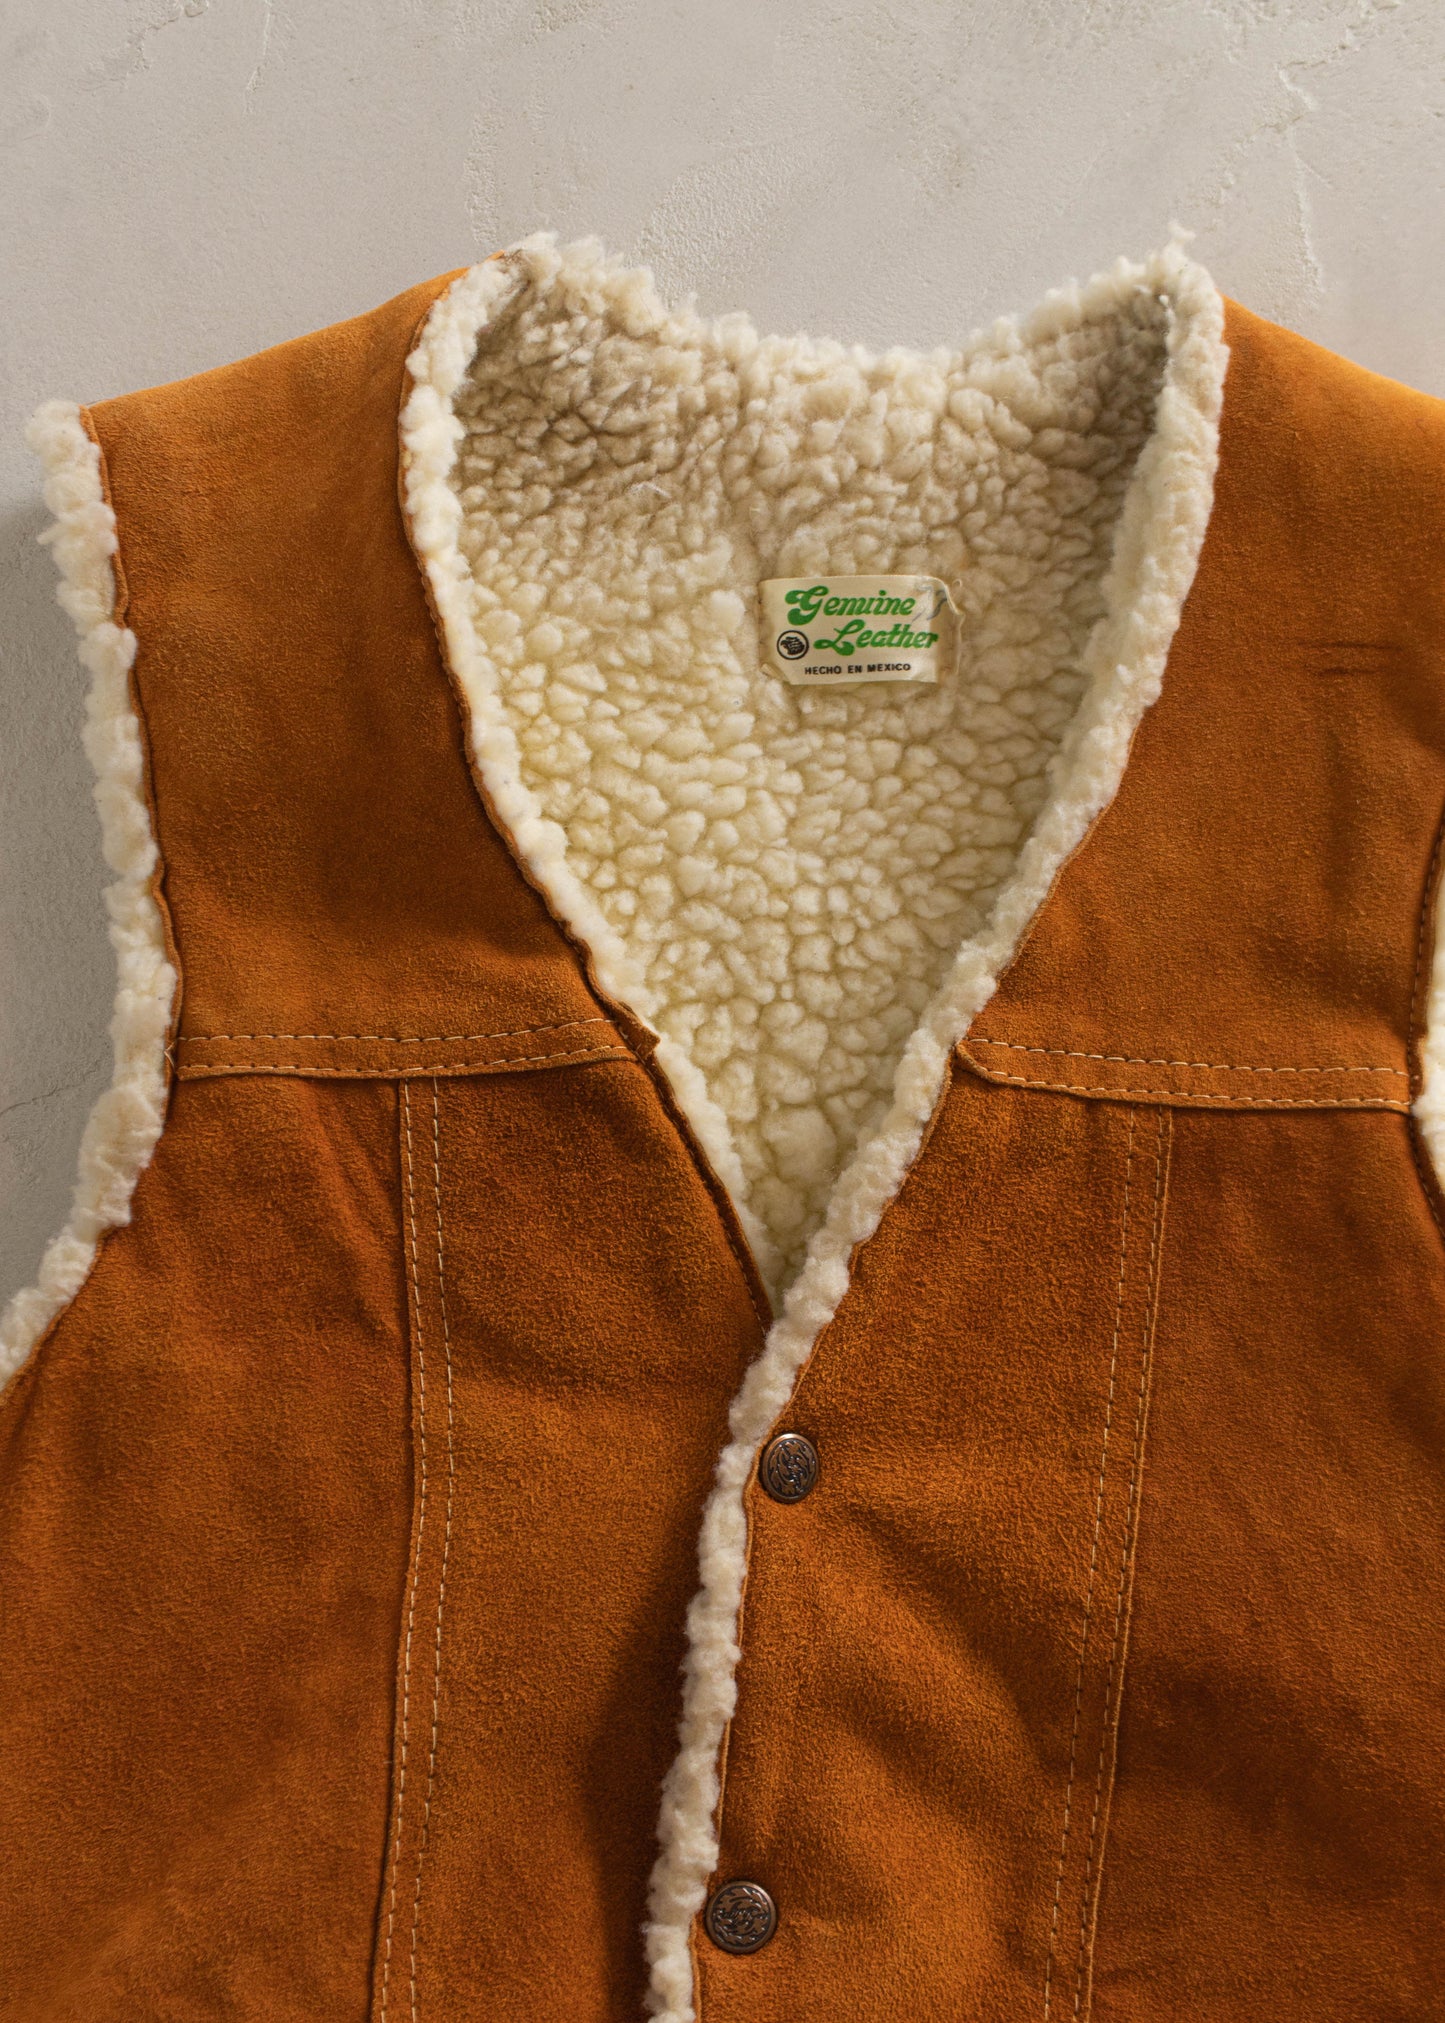 1970s Genuine Leather Sherpa Lined Suede Vest Size XS/S